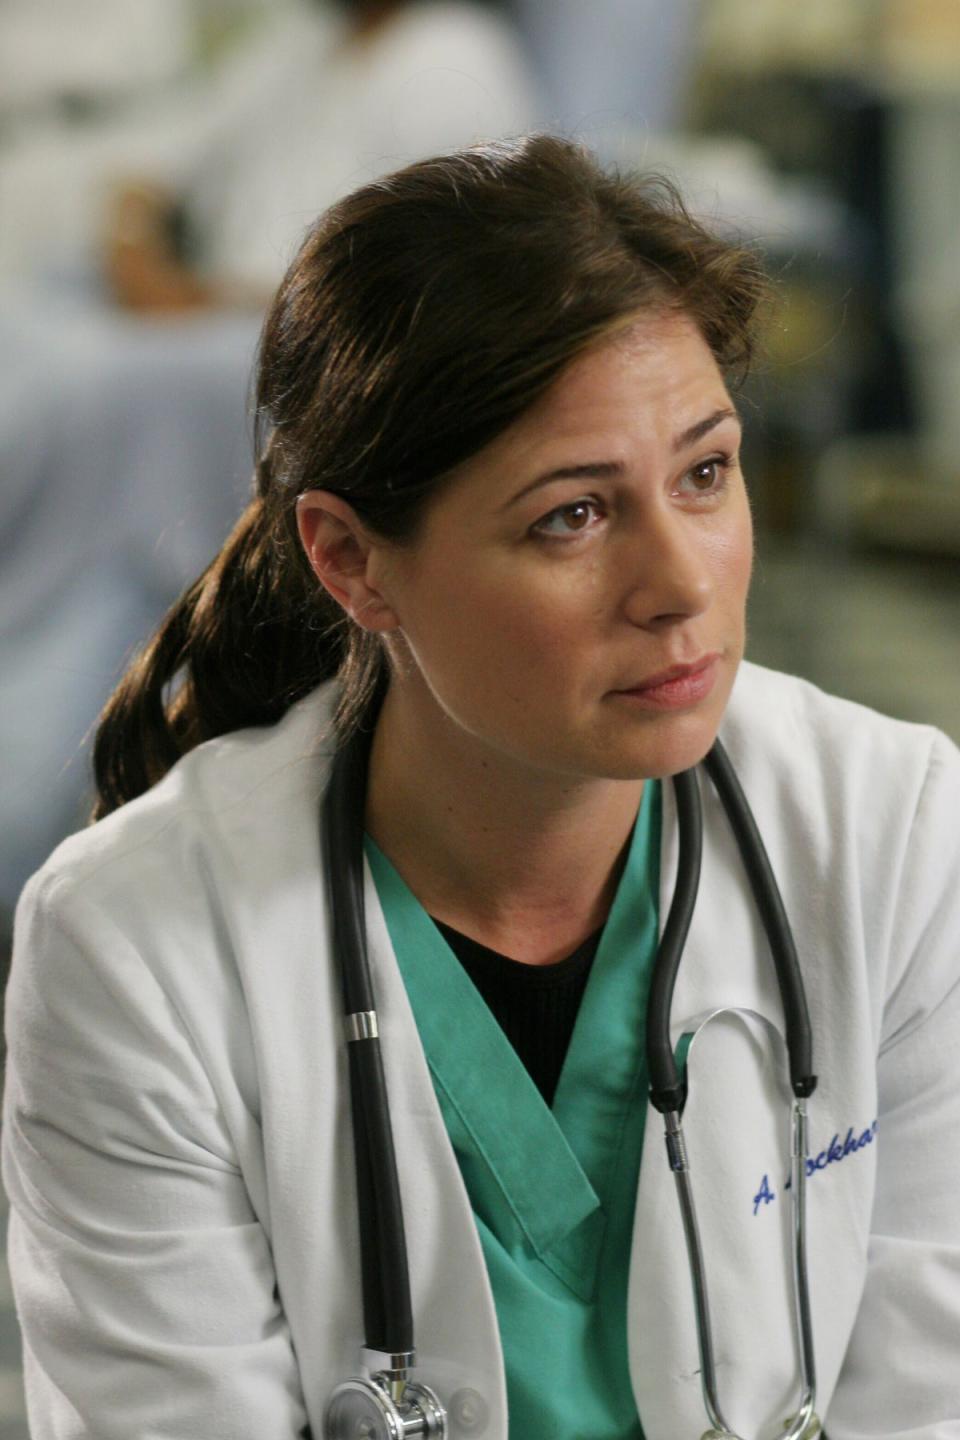 Scrubbing in: Tierney as Dr Abby Lockhart in the long-running medical drama ‘ER’ (Shutterstock)